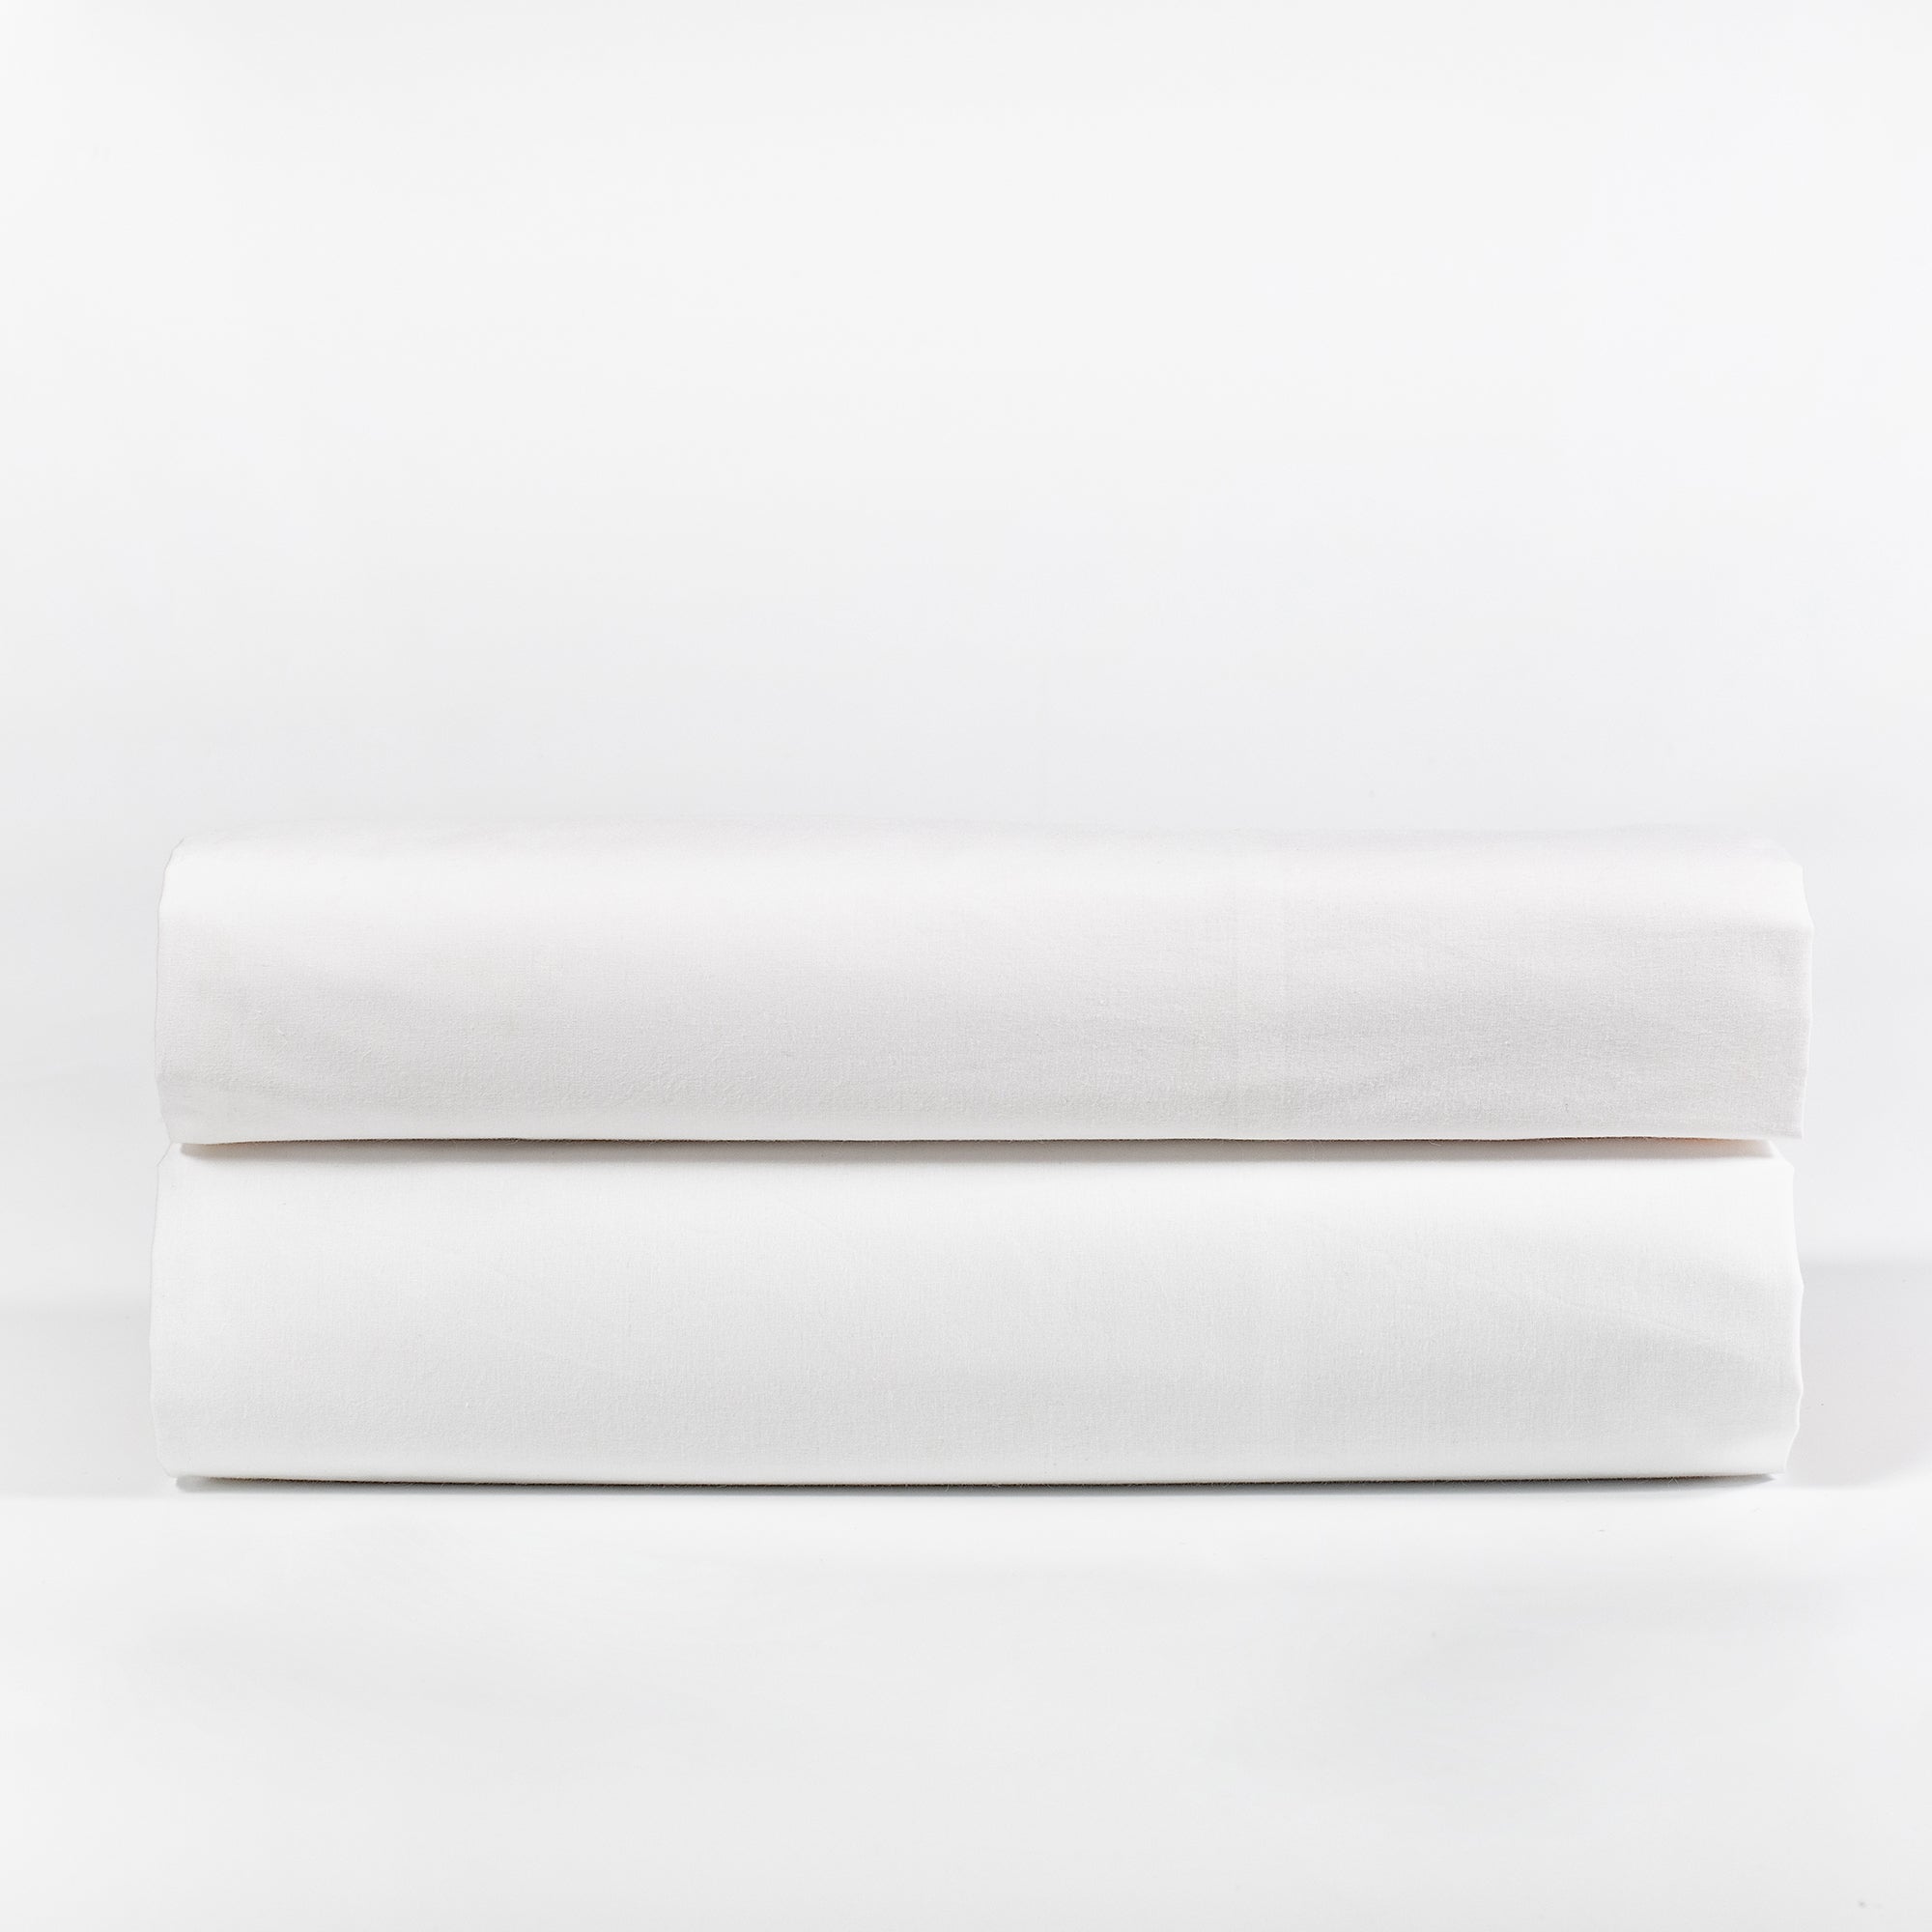 Complete set of sheets in 100% white cotton satin